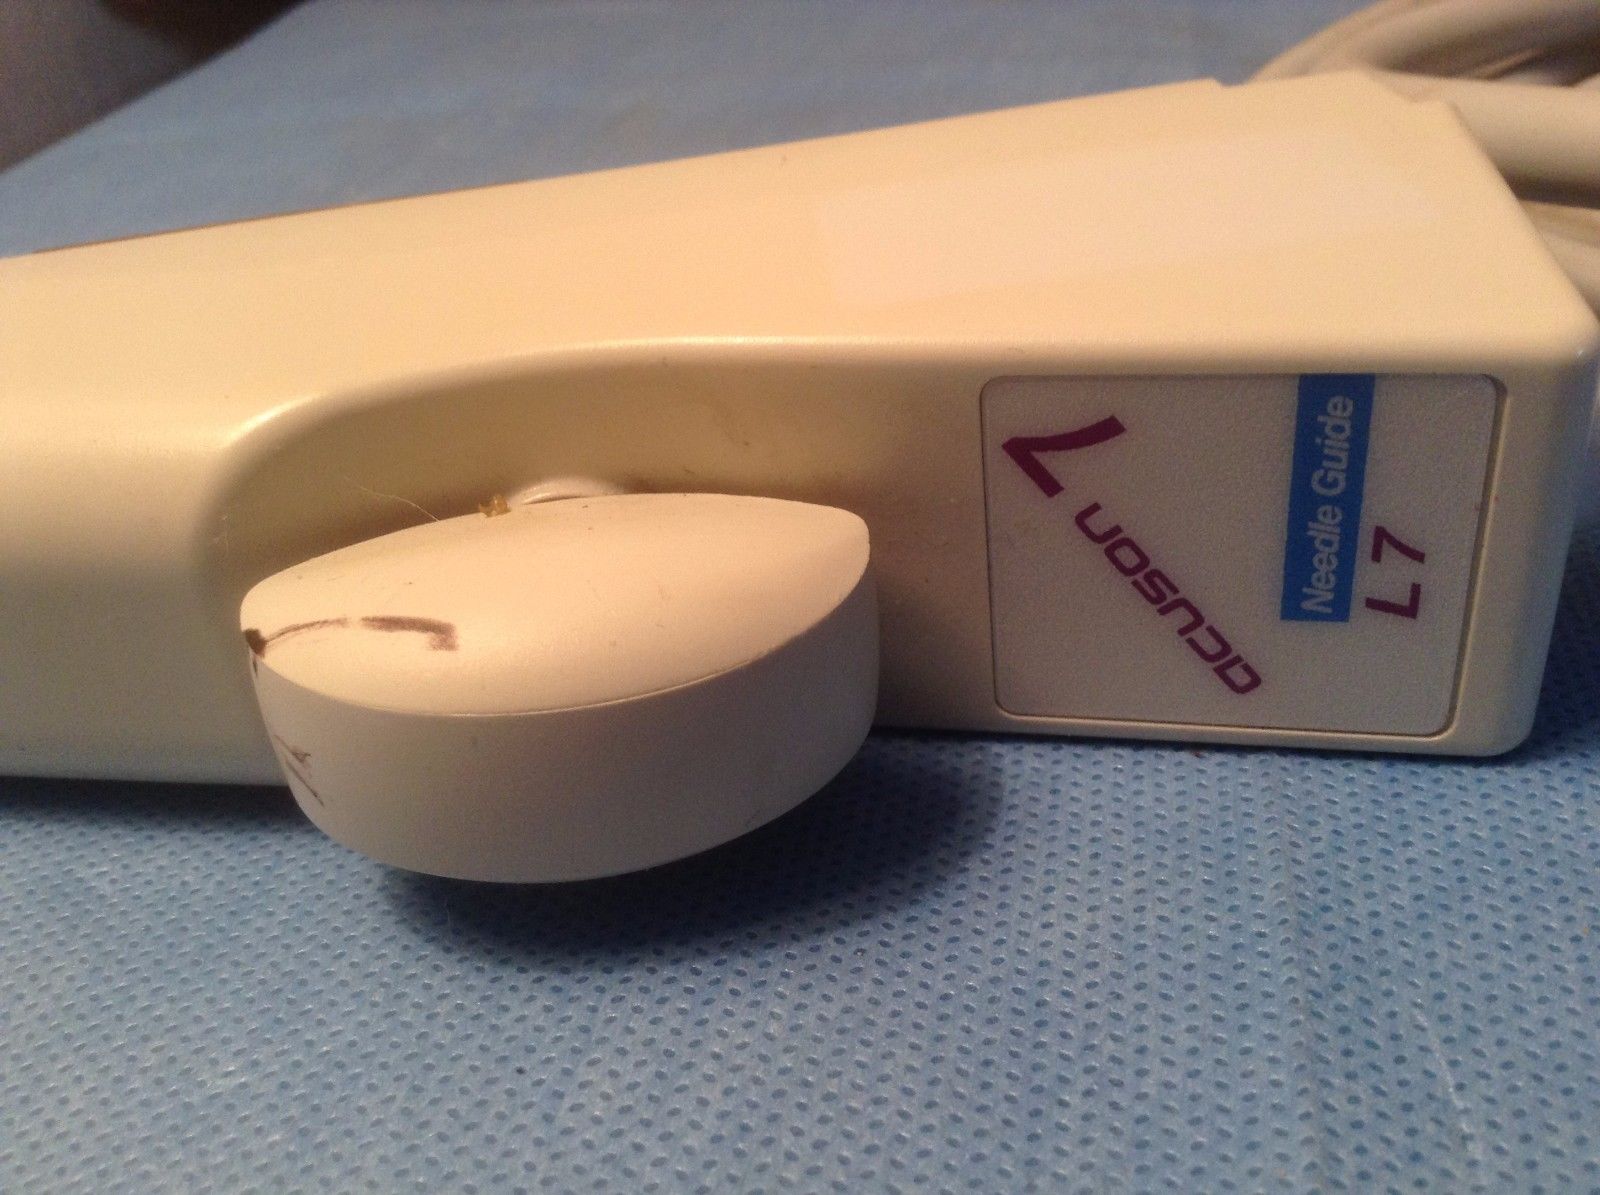 ACUSON ULTRASOUND PROBE L7 FROM WORKING ENVIRONMENT GOOD CONDITION CLEAN DIAGNOSTIC ULTRASOUND MACHINES FOR SALE